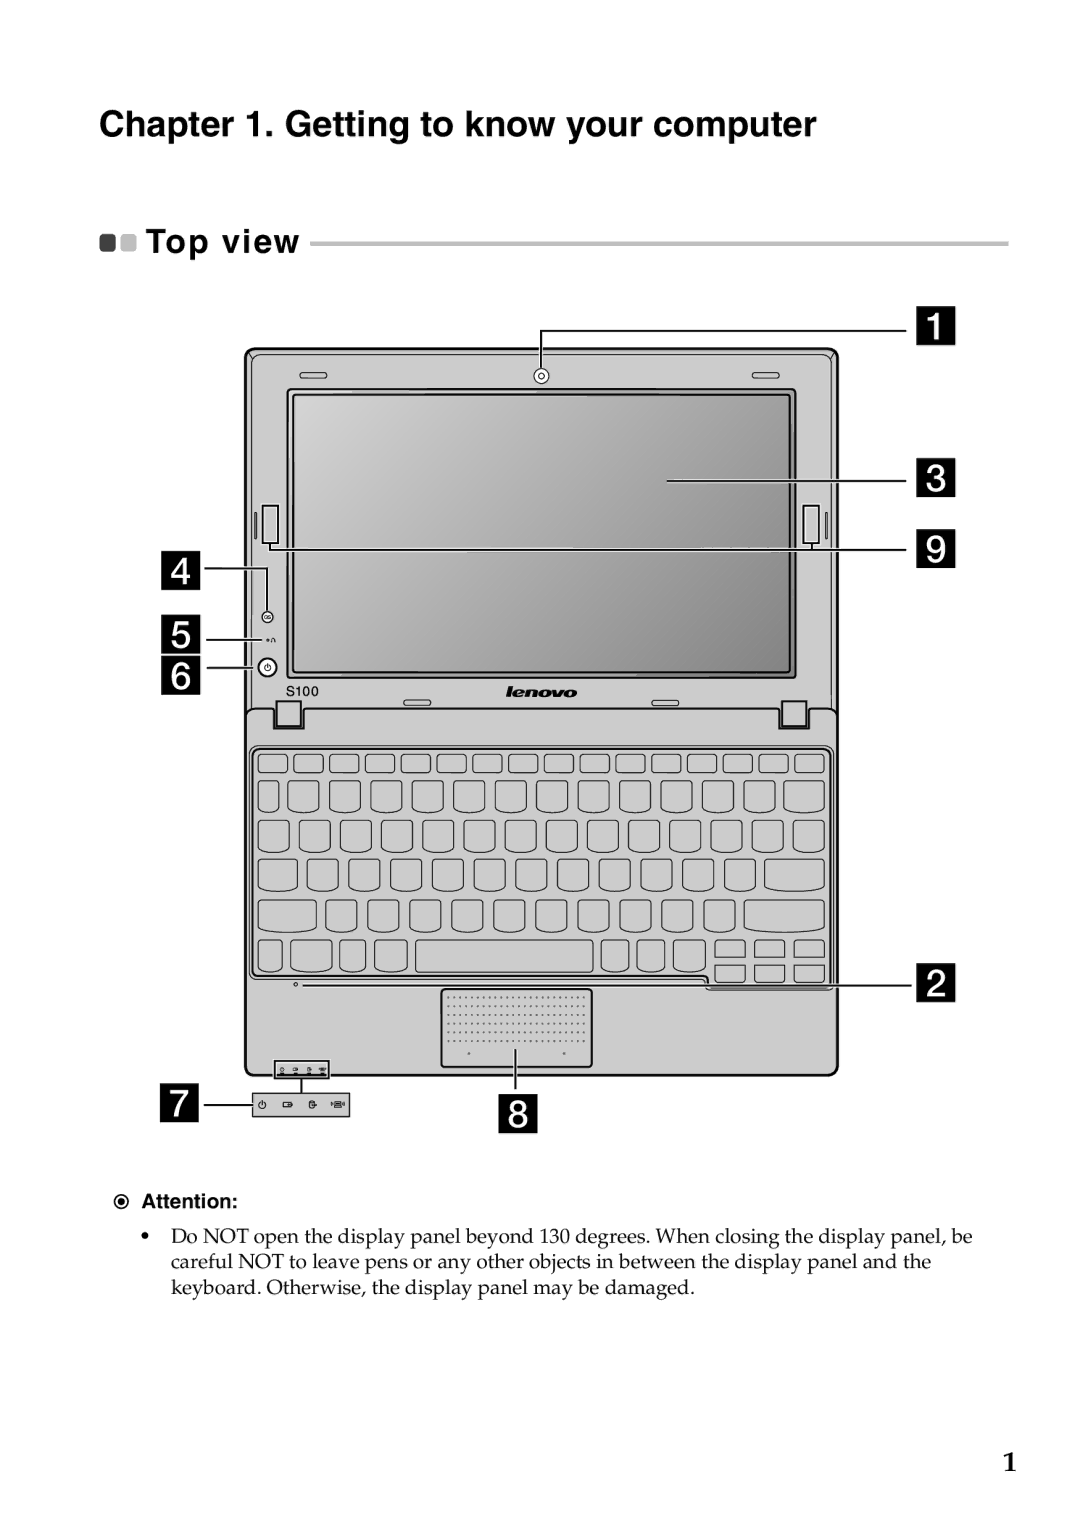 Lenovo S100 manual Getting to know your computer, Top view 